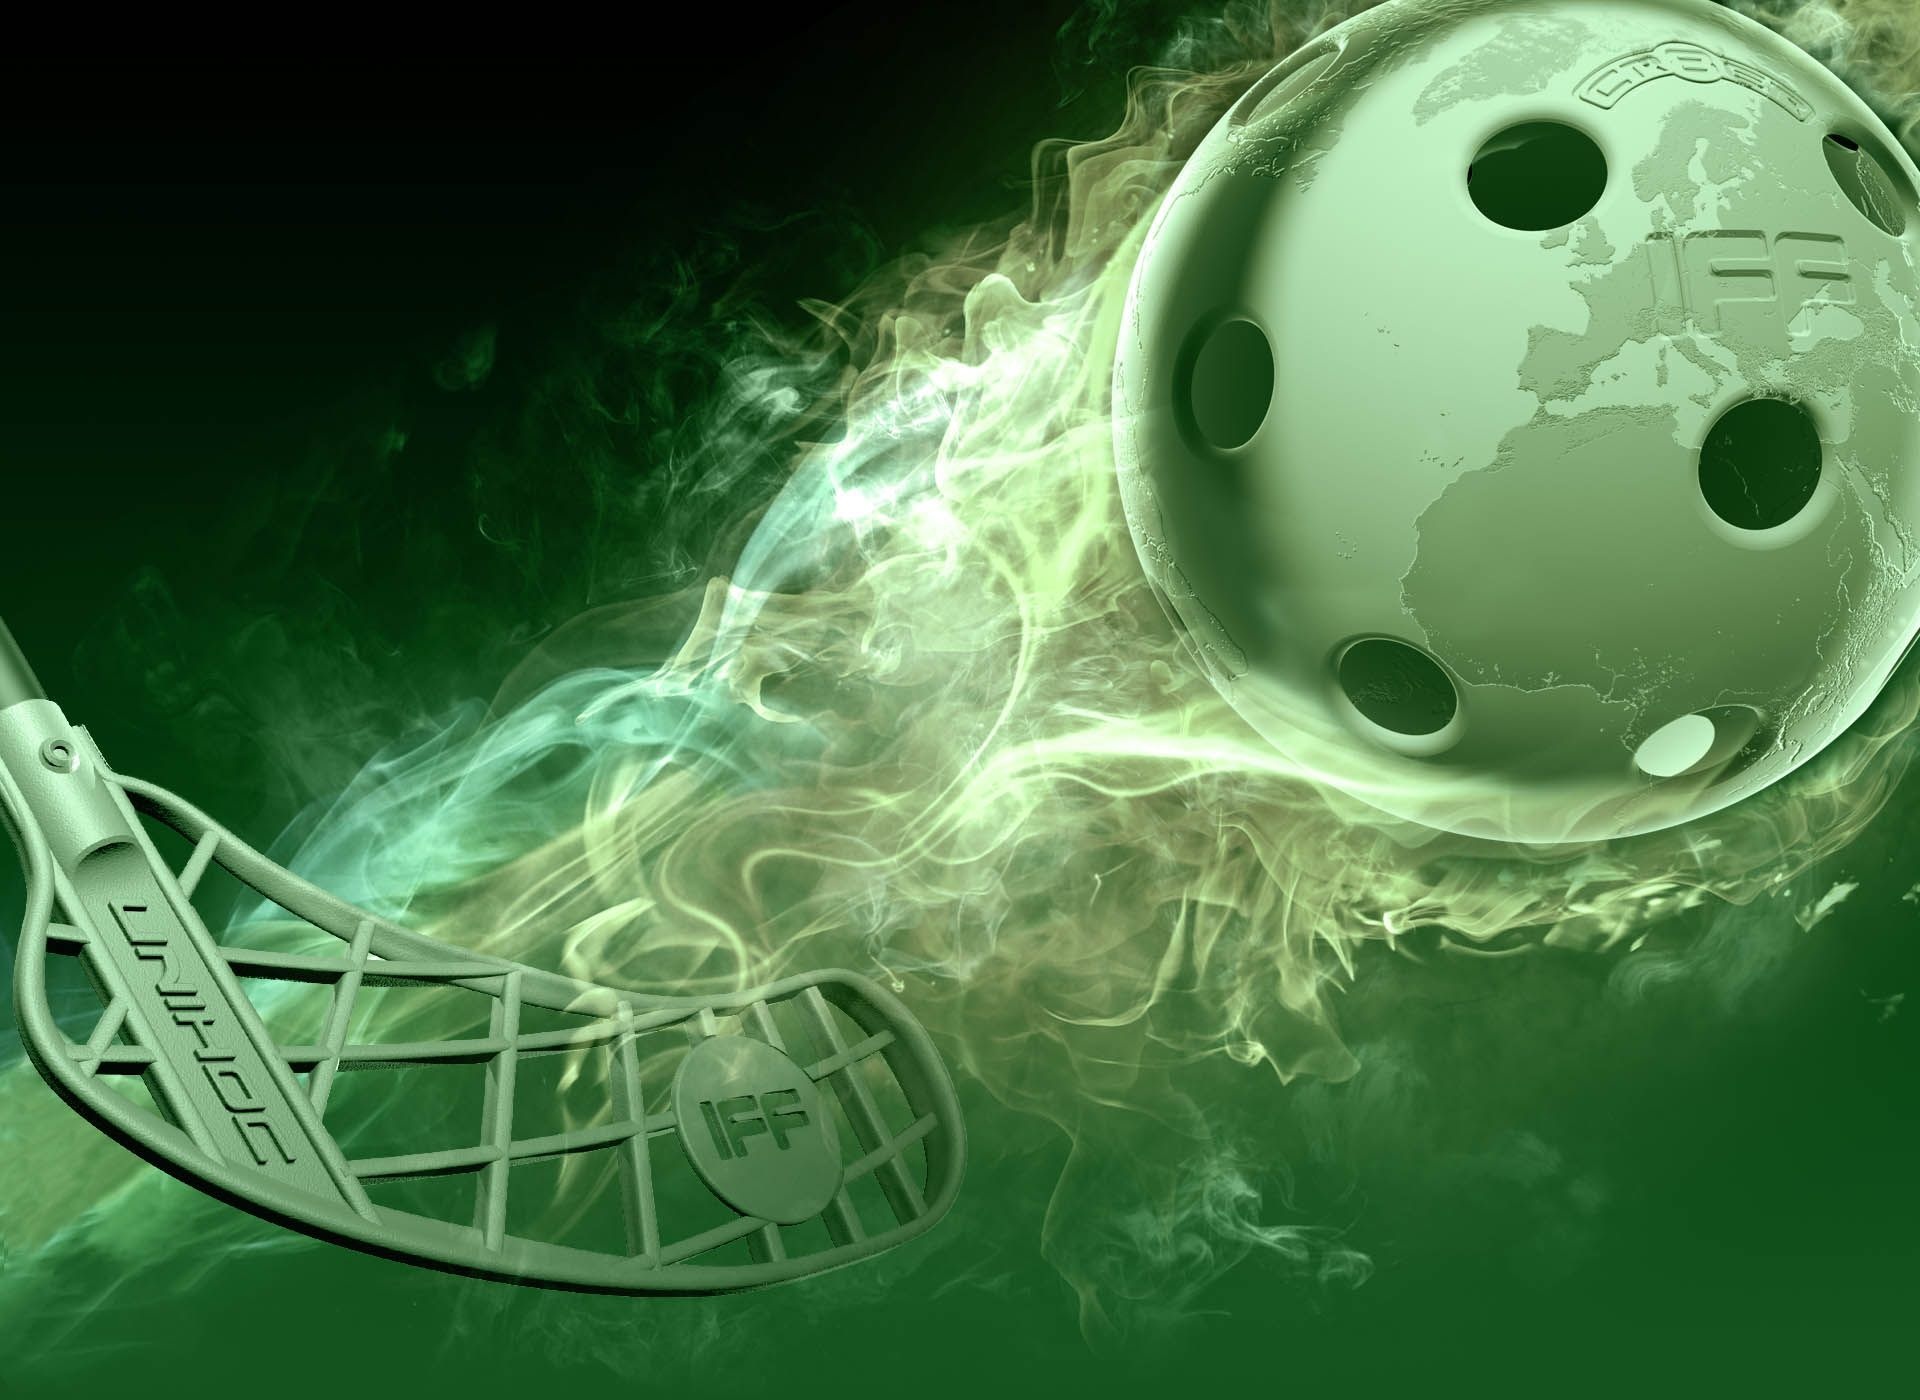 Floorball: A stick strikes the Earth-style ball, International competitive sports discipline. 1920x1400 HD Wallpaper.